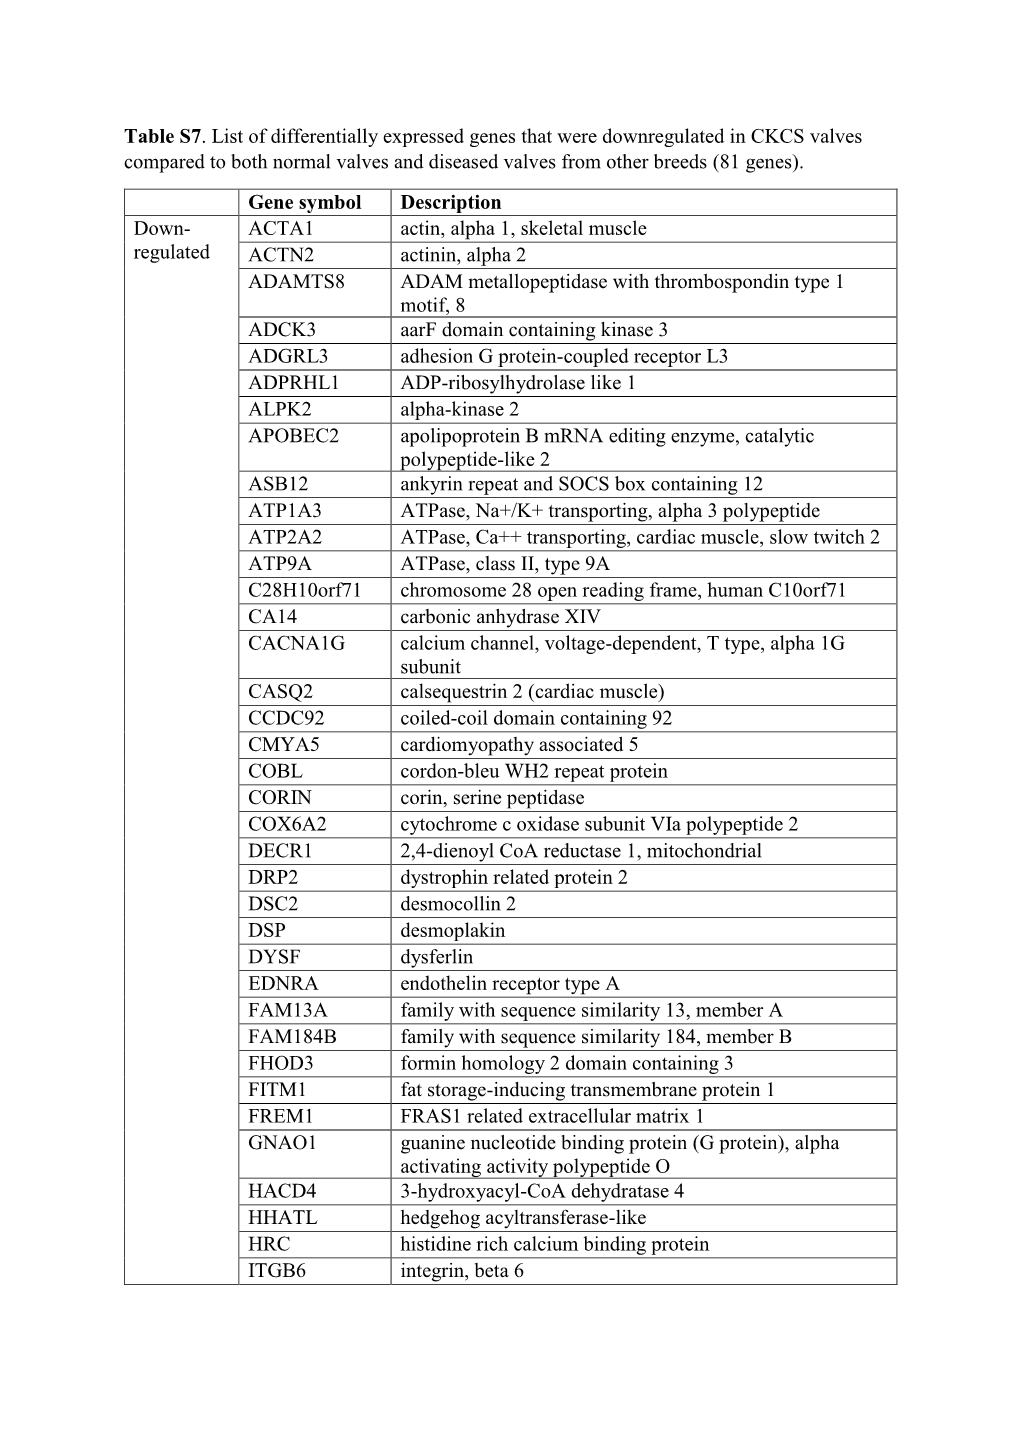 Table S7. List of Differentially Expressed Genes That Were